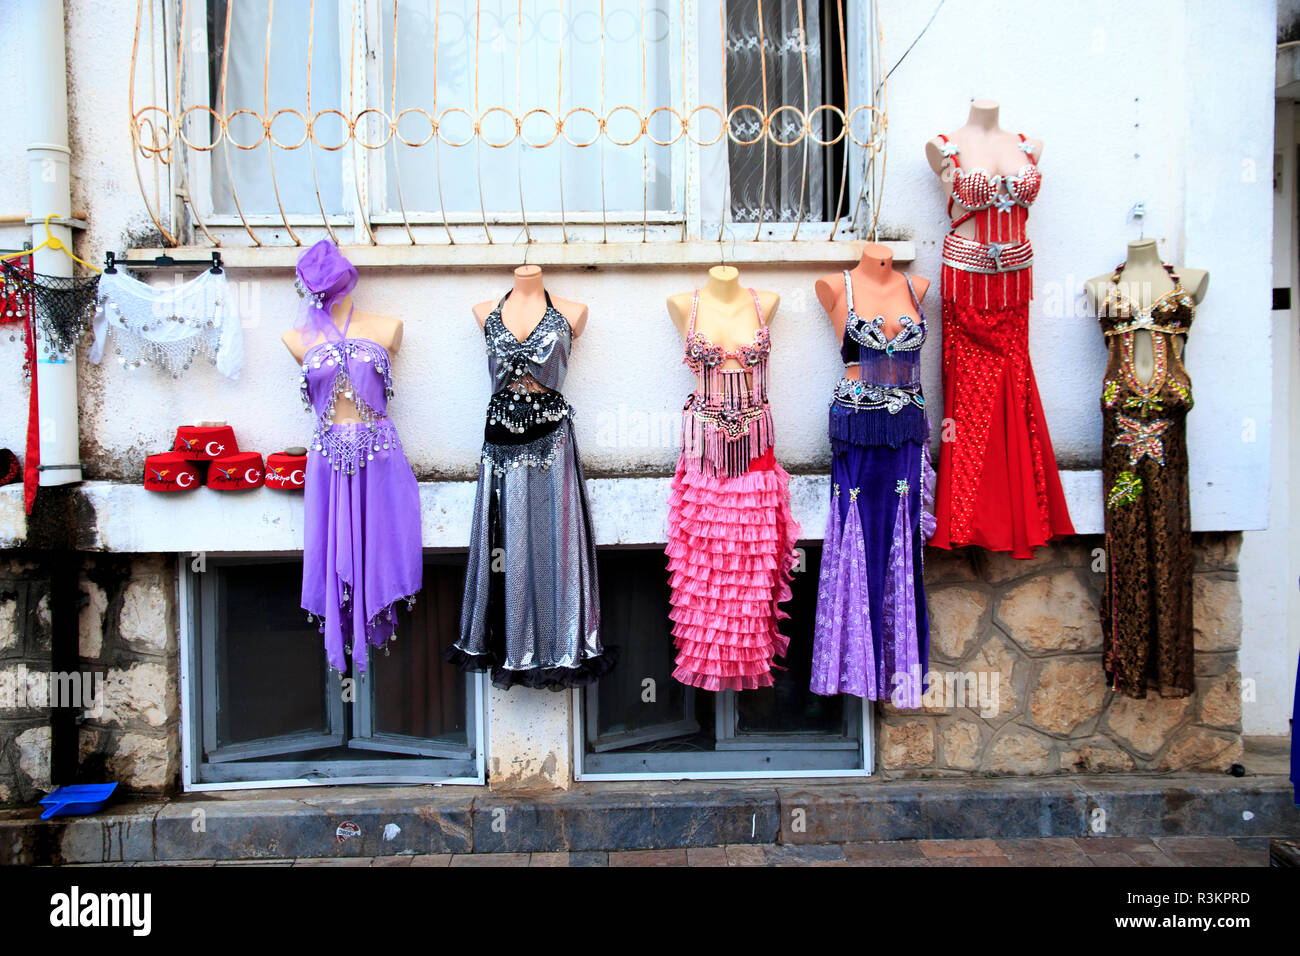 belly dancing outfits for sale